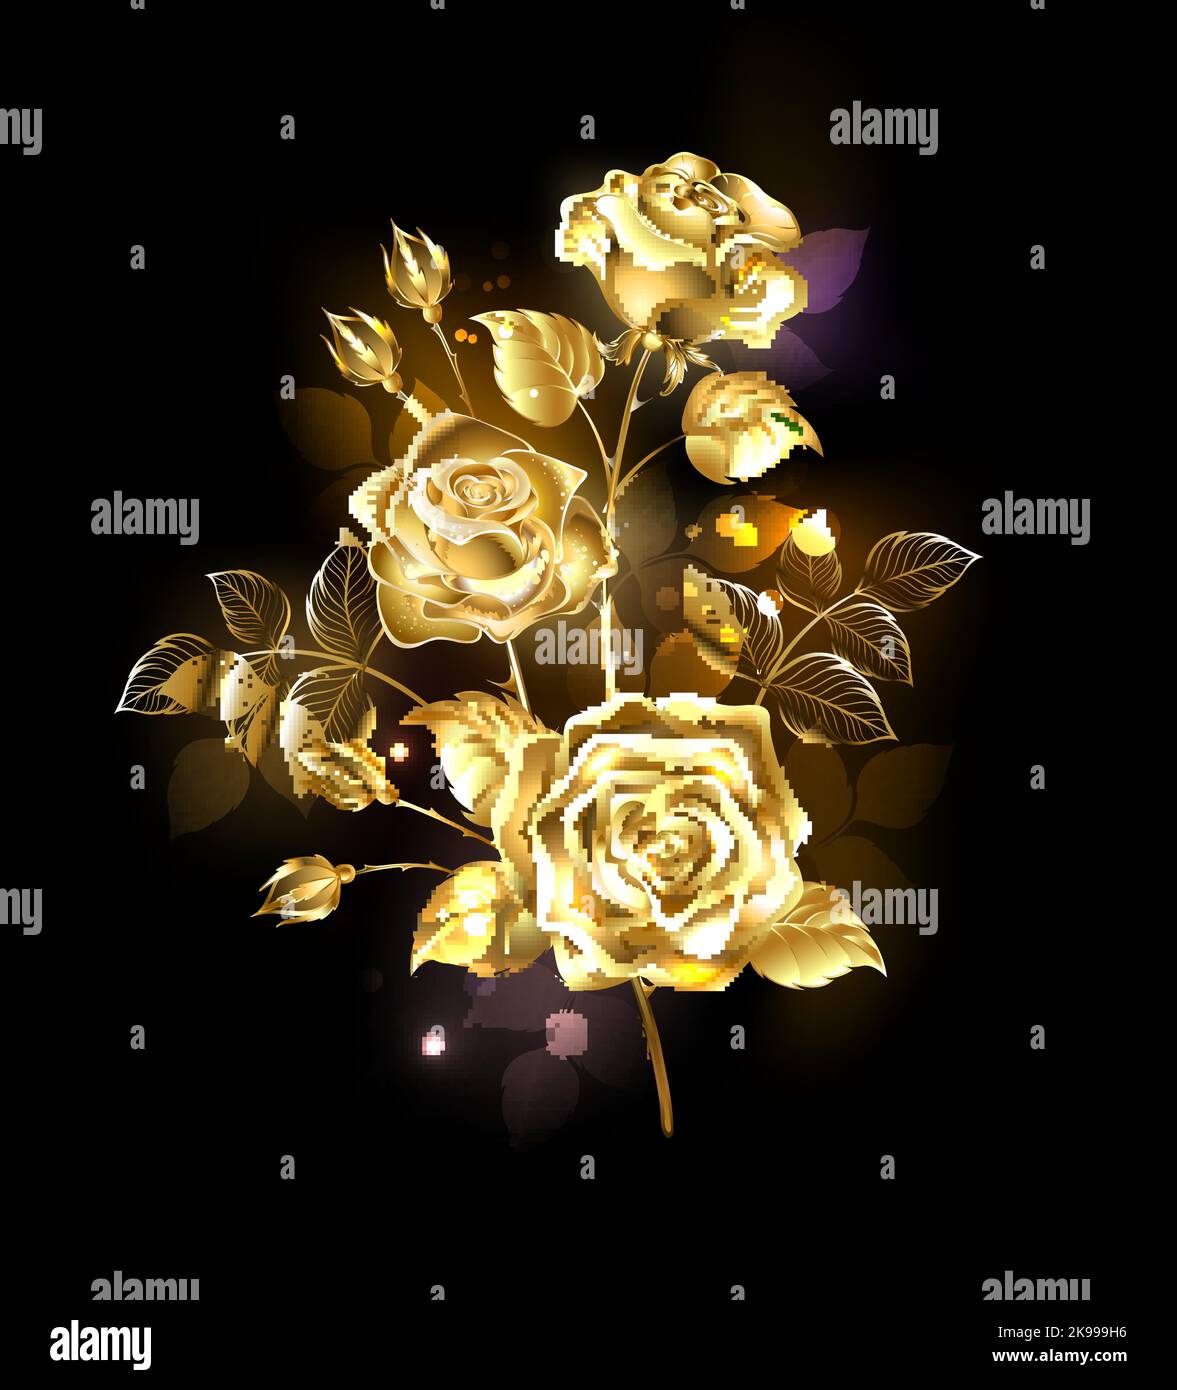 Branch of artistically painted gold, jewelry roses with golden leaves and gilded buds on black, glowing background. Gold rose. Stock Vector